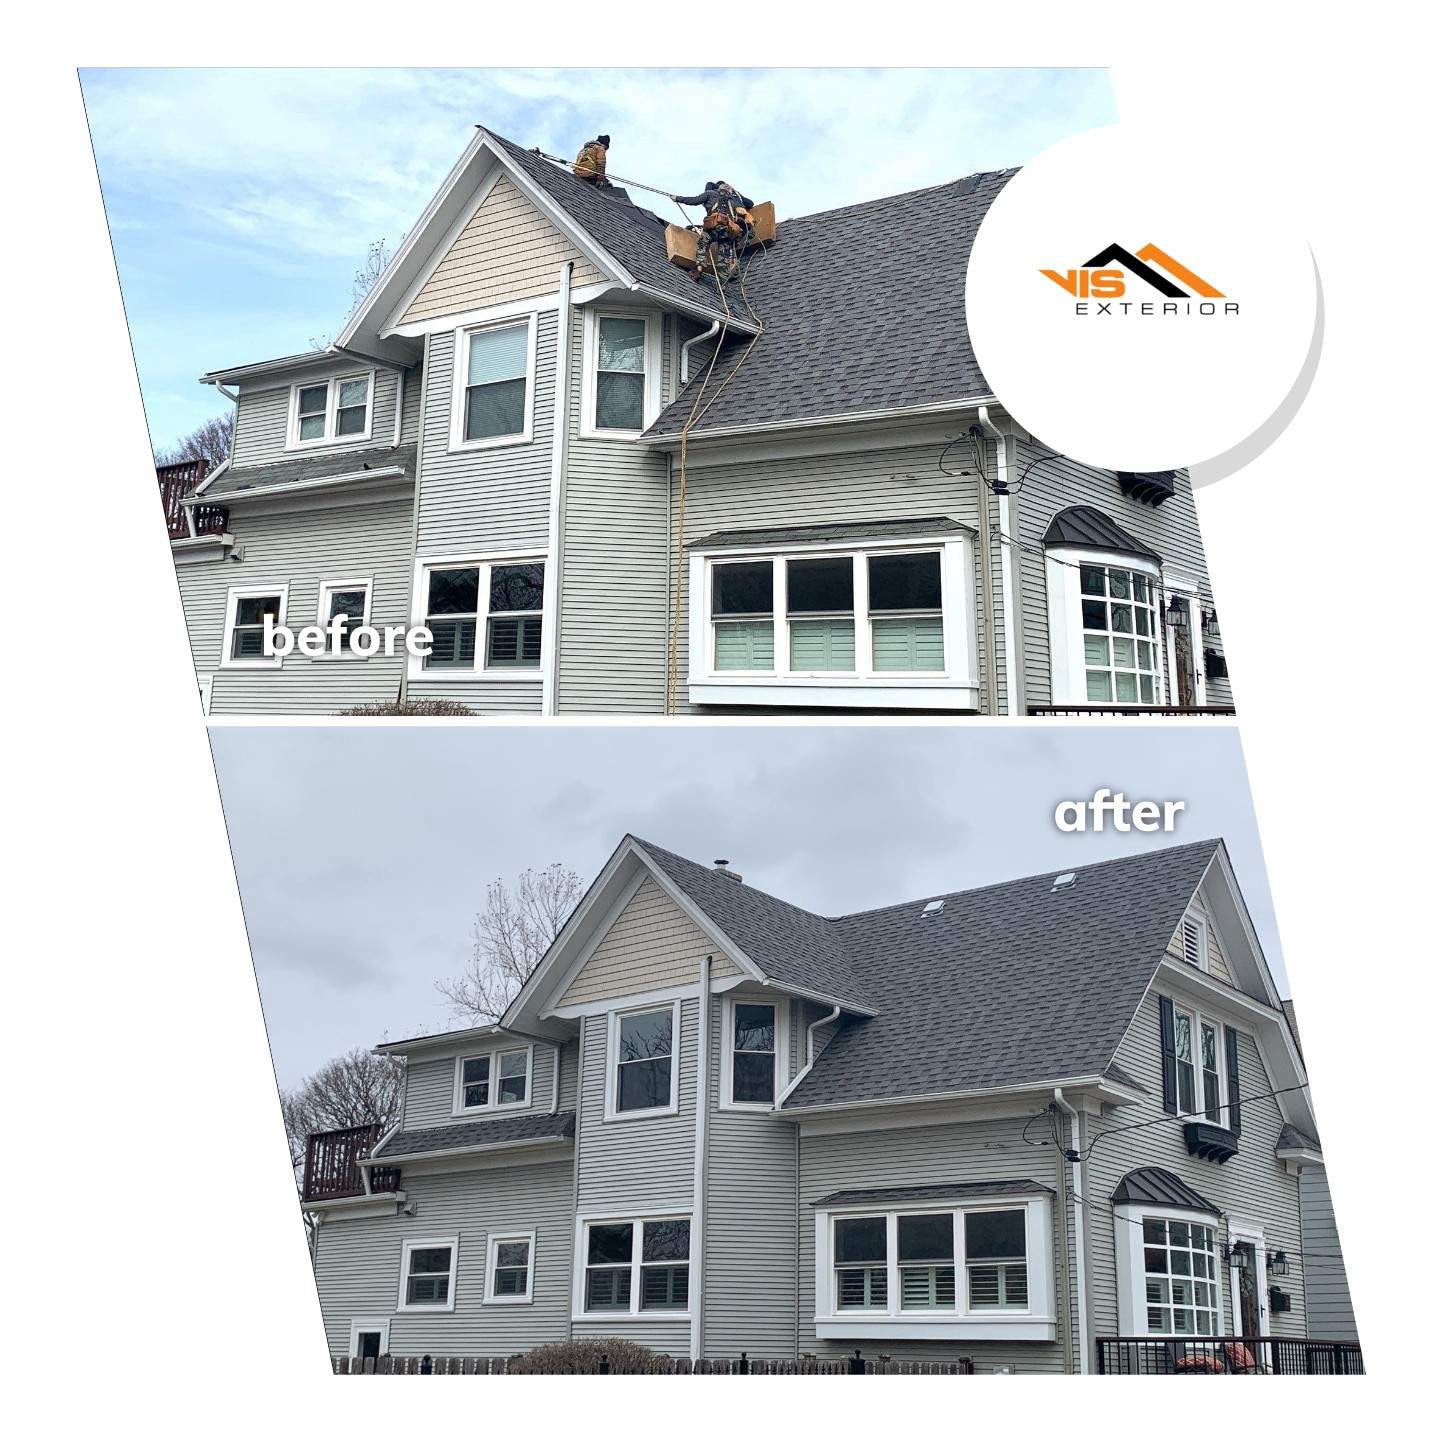 Royal Estate siding installation and shingle roof replacement in Arlington Heights before after project photo